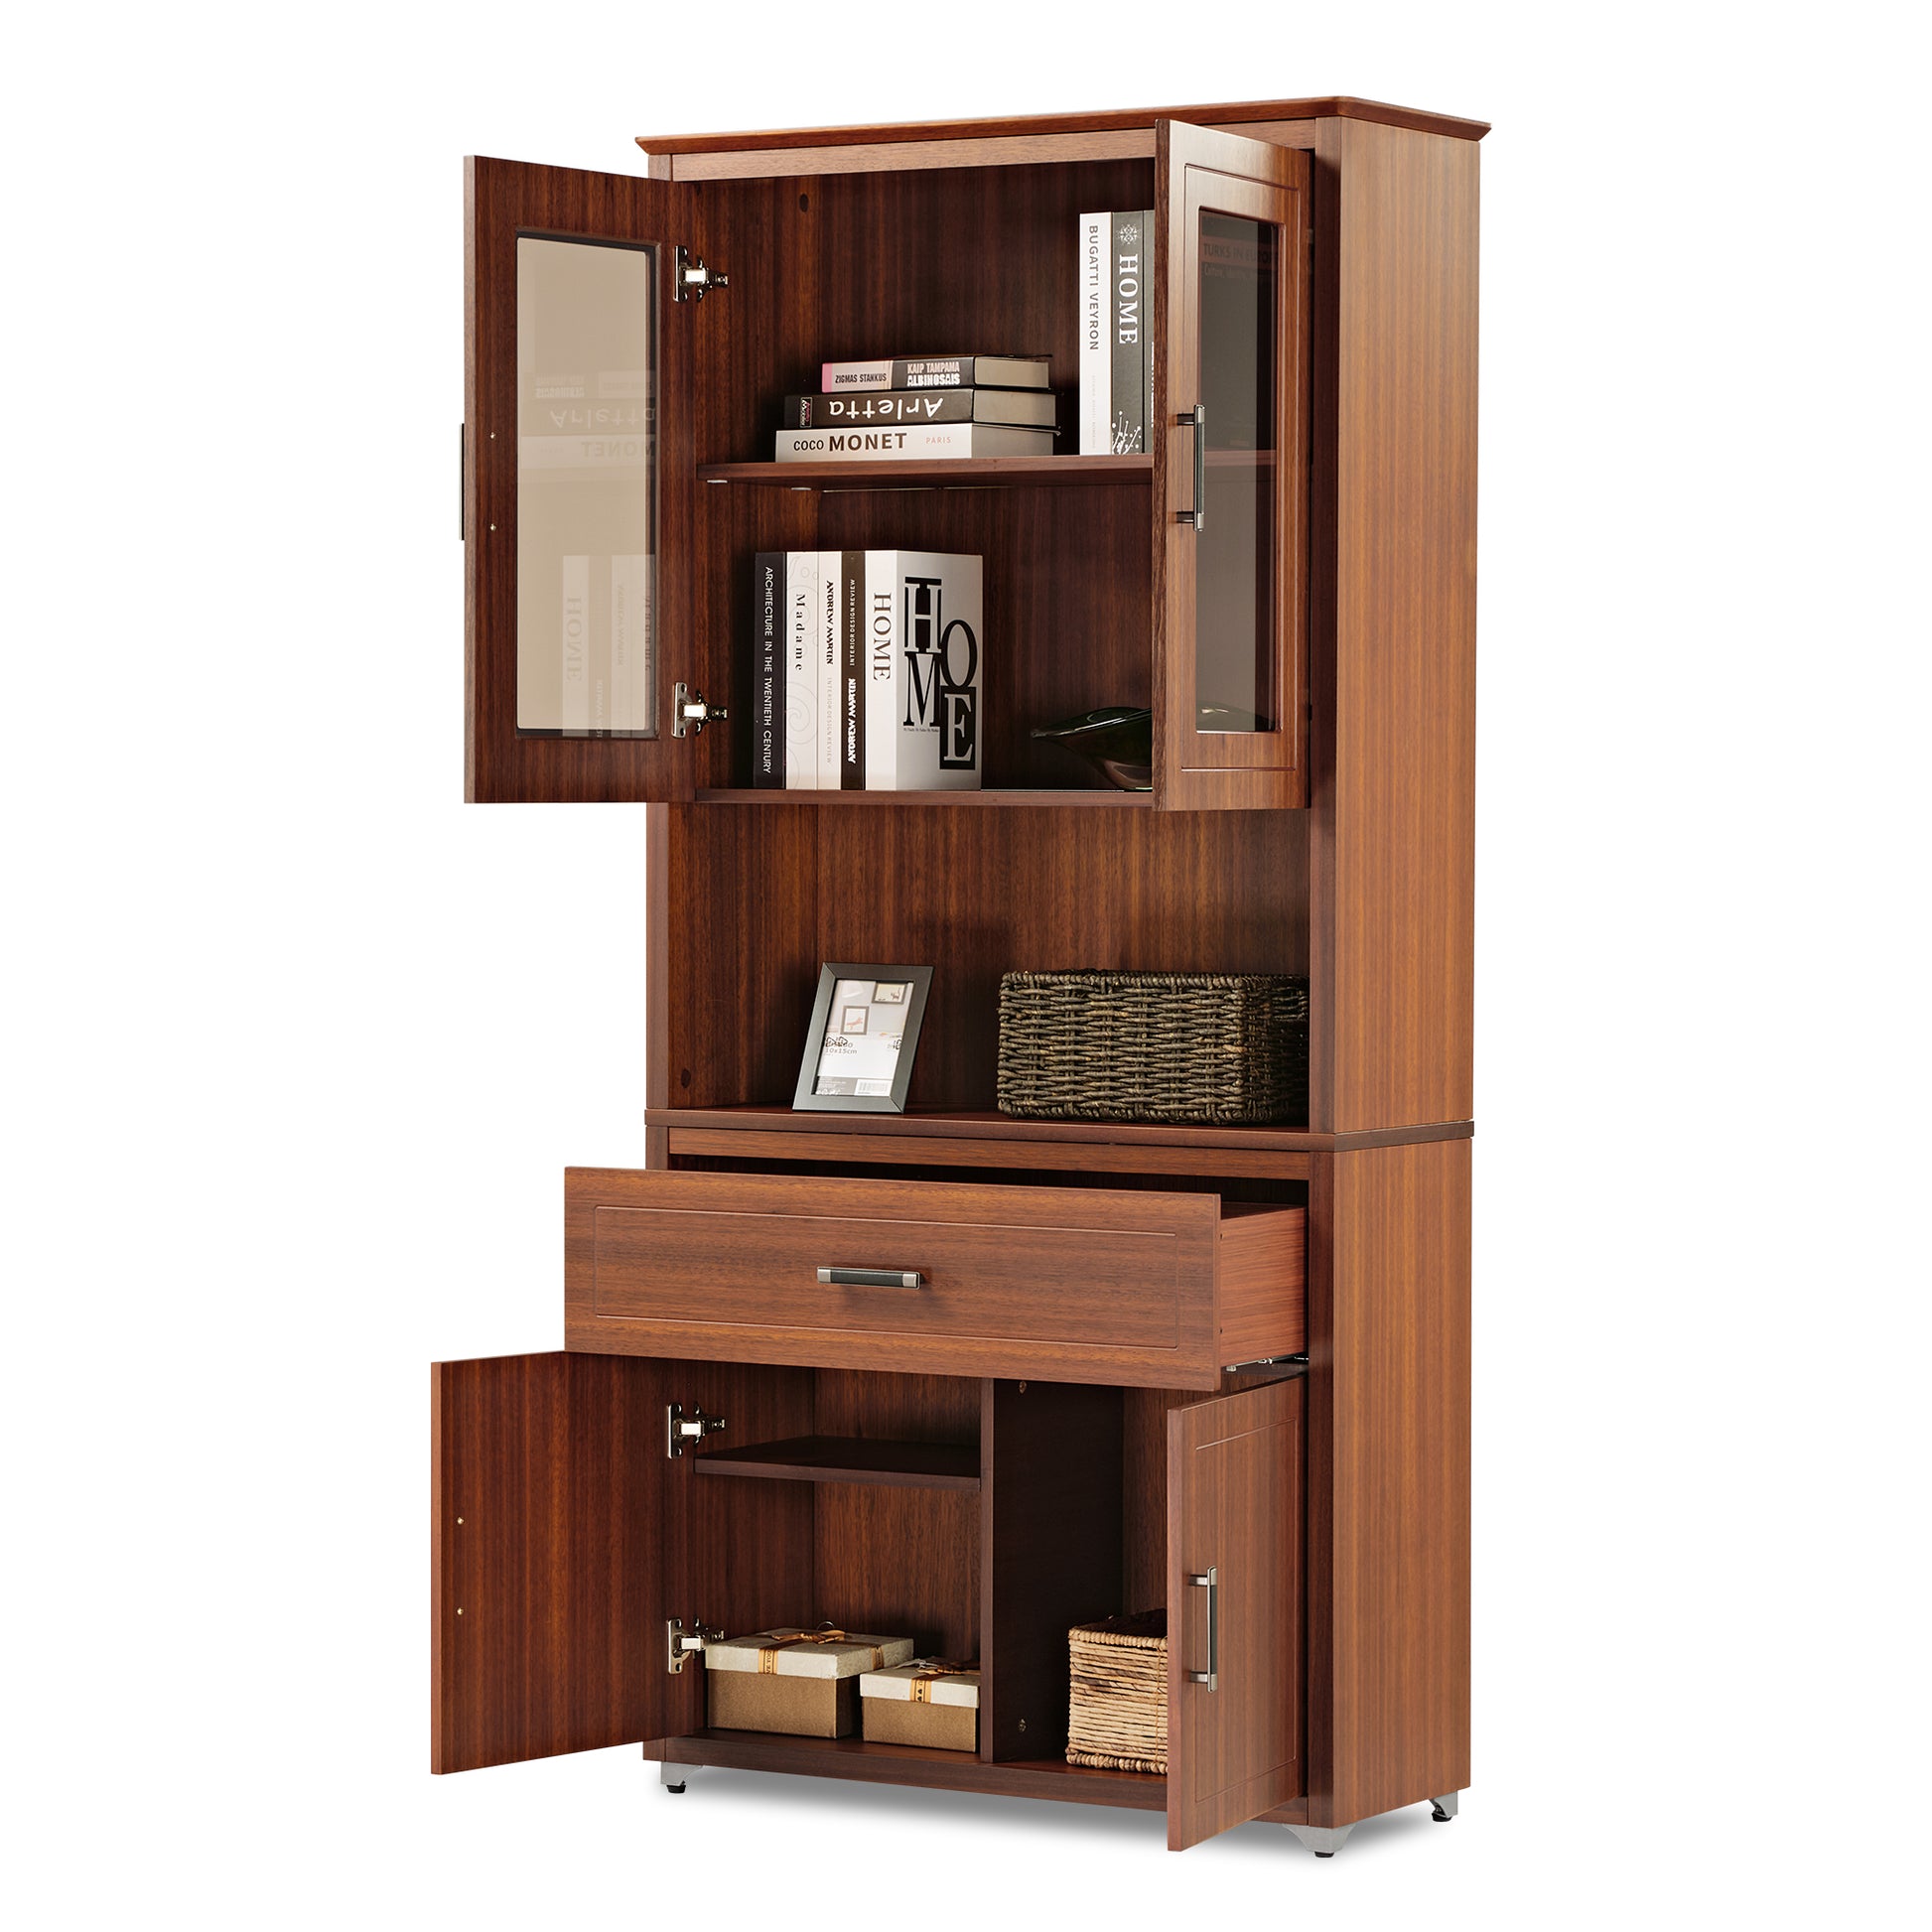 Executive Ark Collection, 72 inch Storage Cabinet Bookshelf with Doors, Walnut Open Display Image